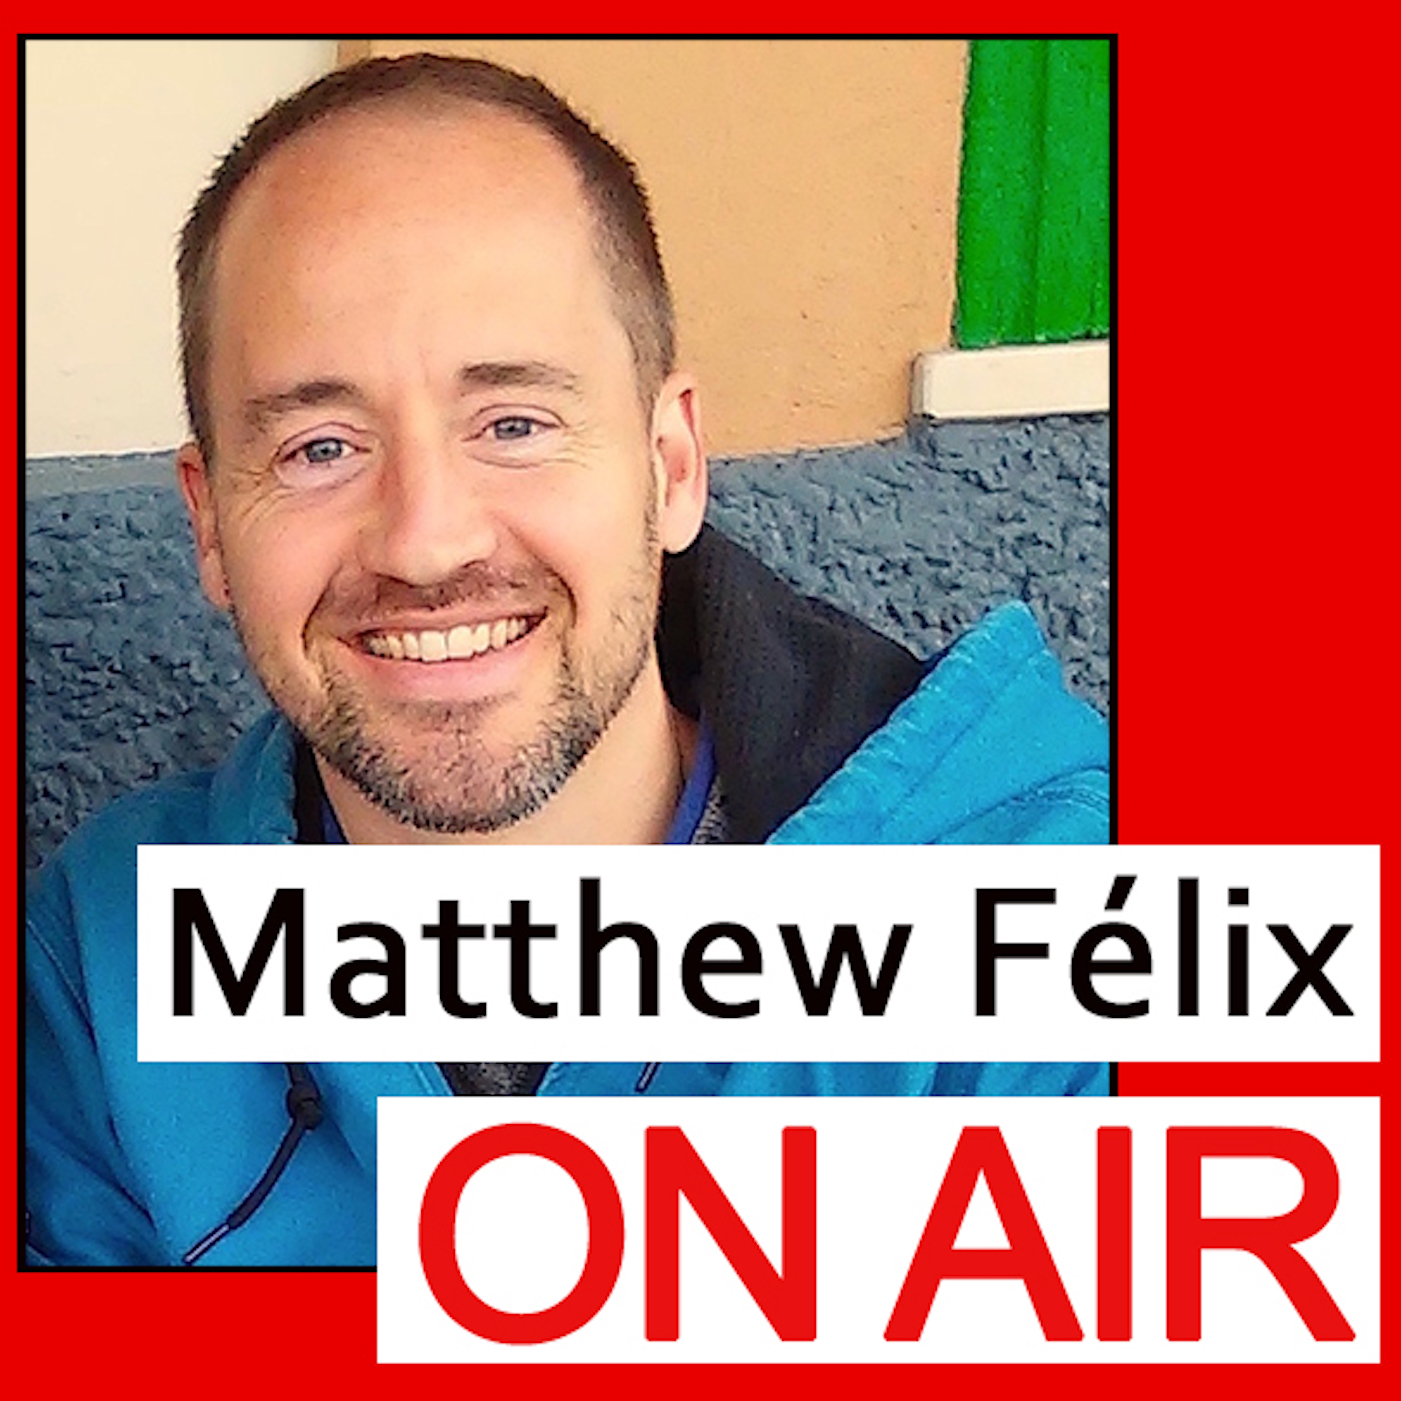 Matthew Felix On Air: People Who Create. People Who Make a Difference.